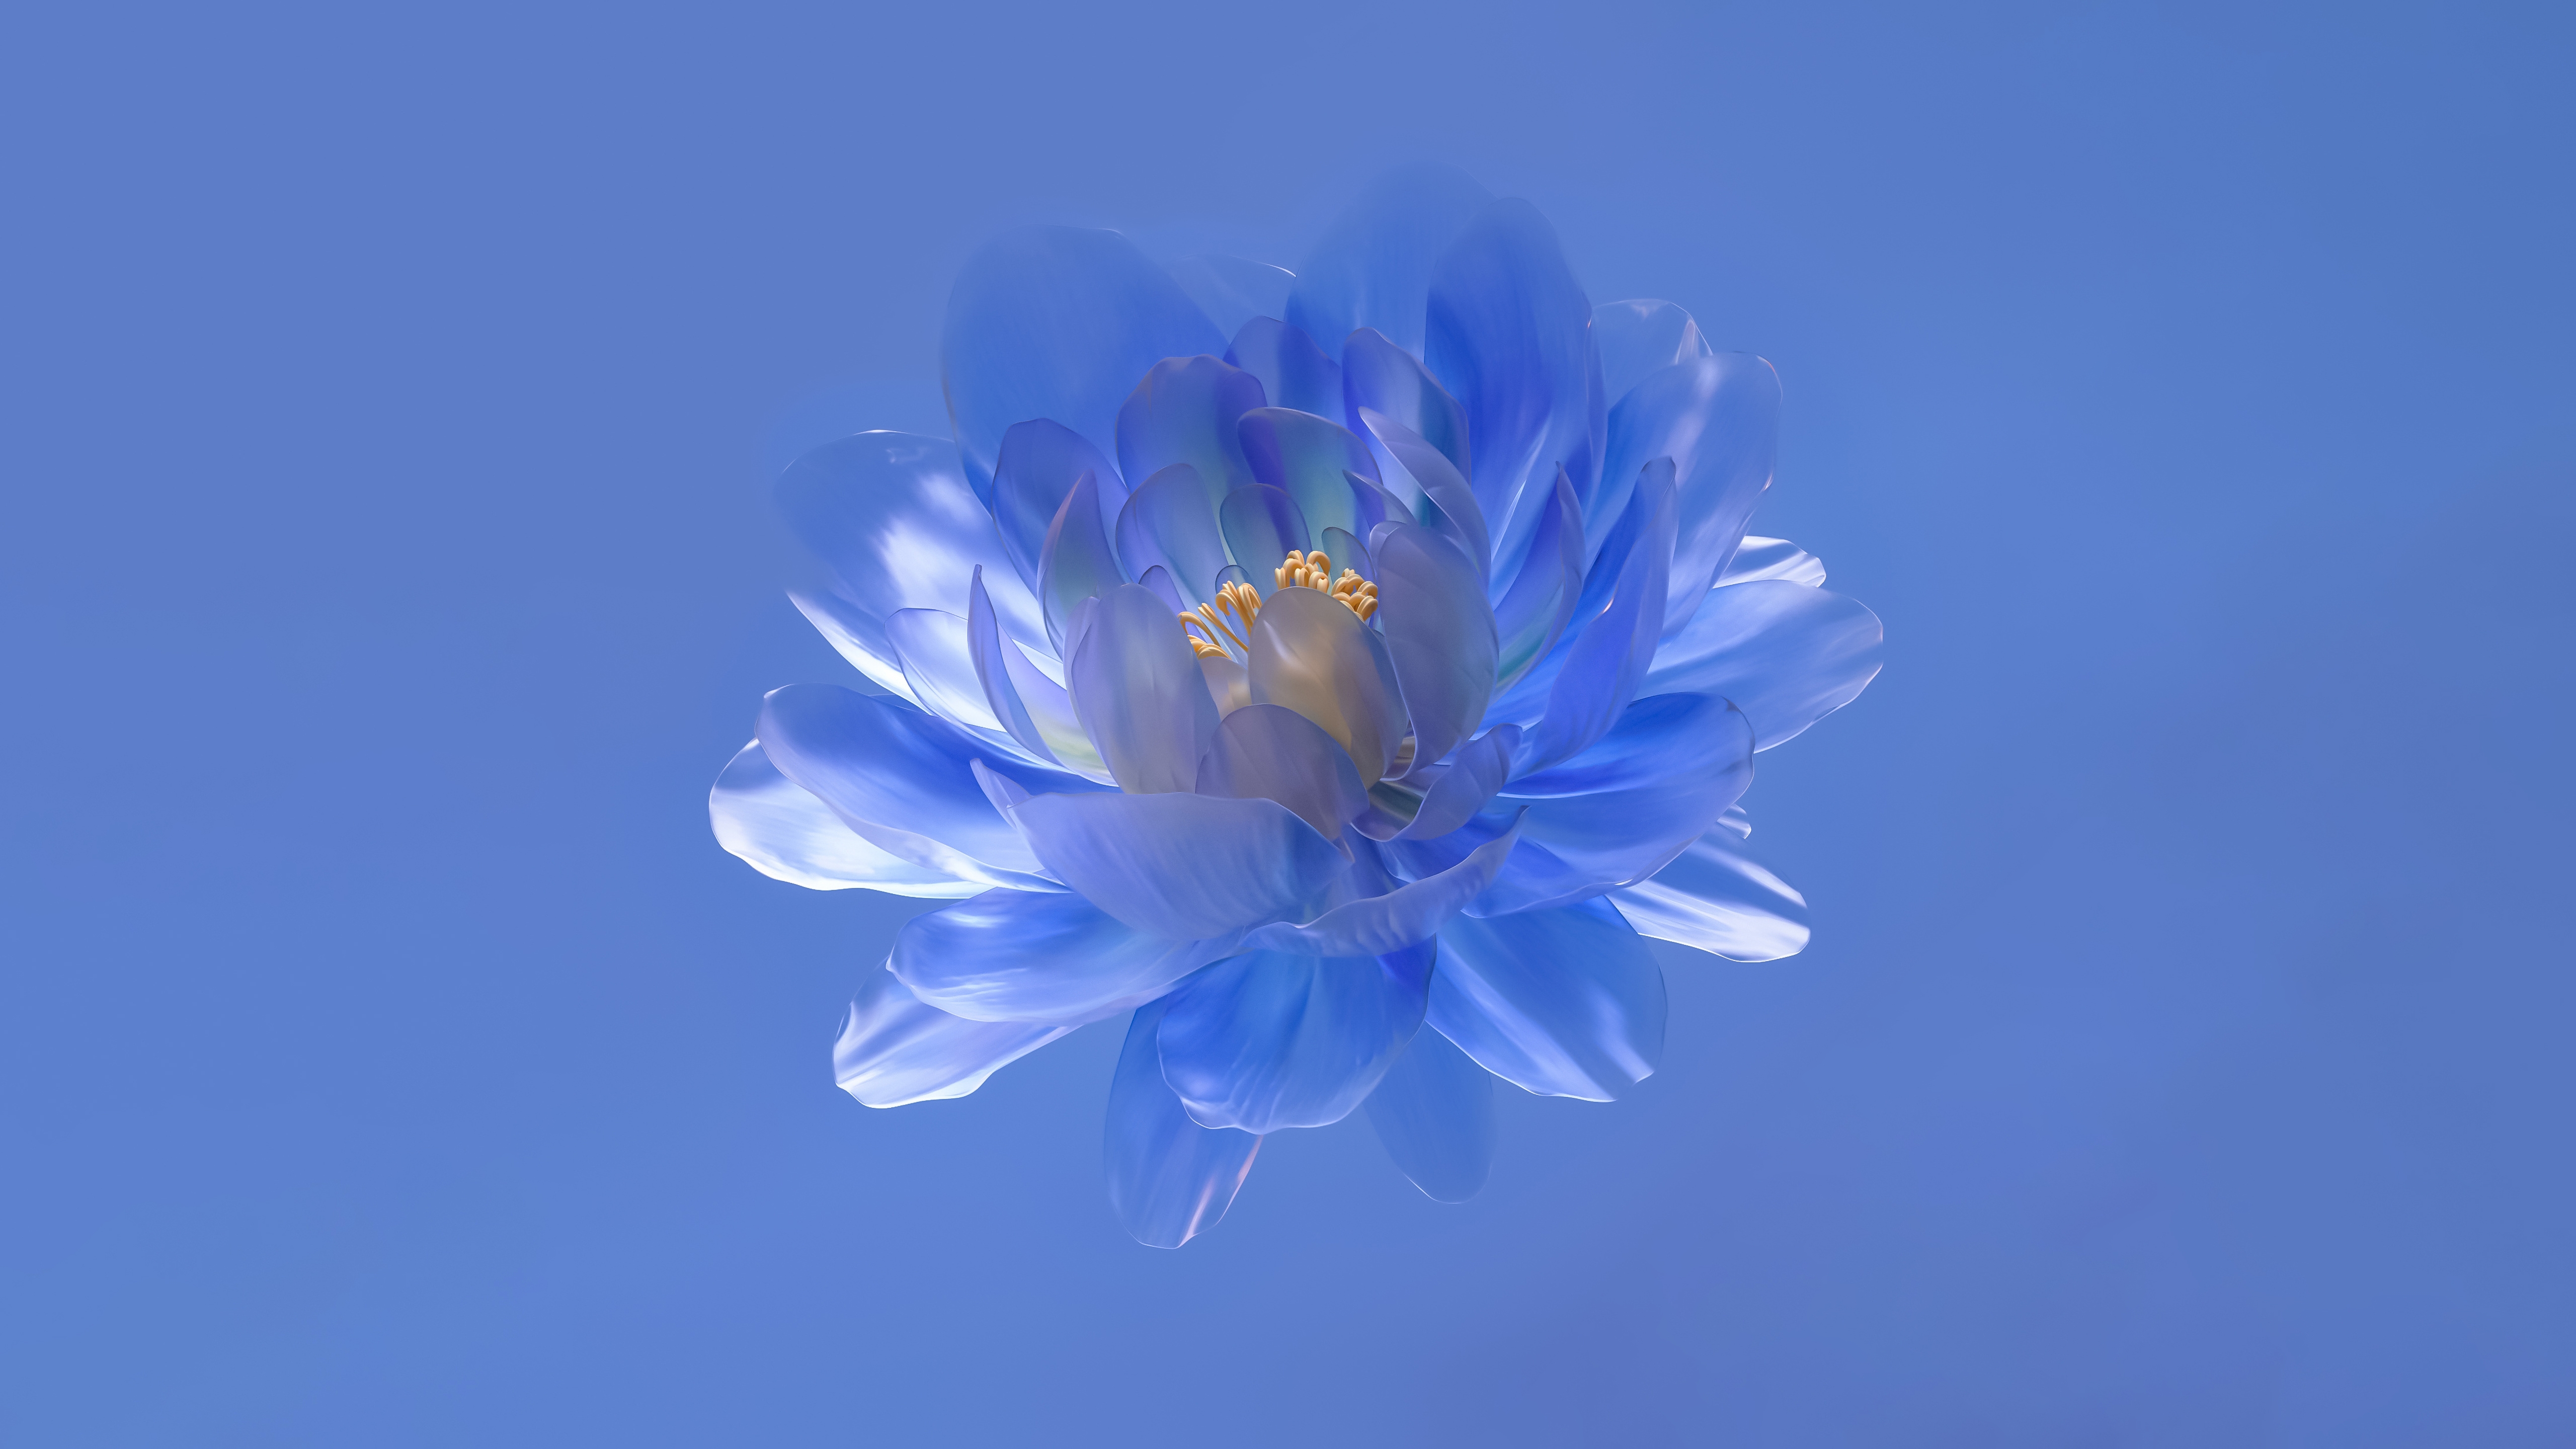 HD wallpaper, Abstract Flower, Blue Background, 5K, Blue Aesthetic